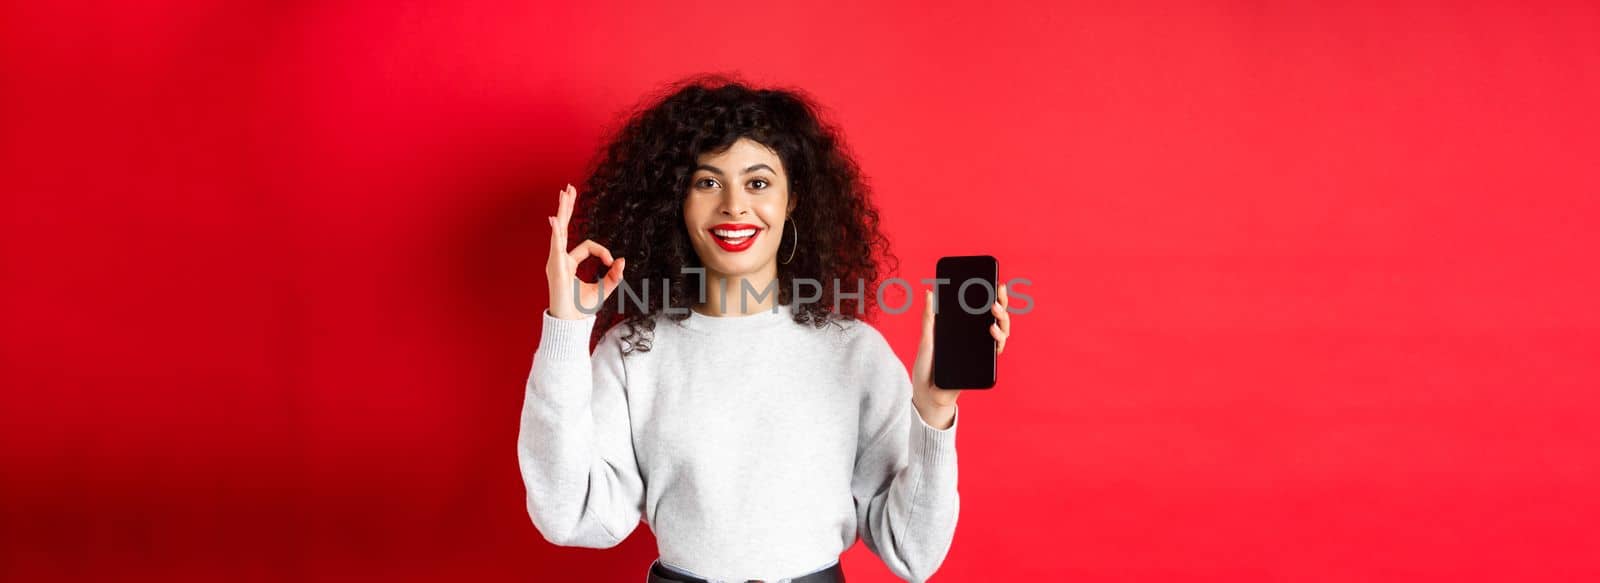 Cheerful european woman with curly hair, showing empty mobile phone screen and okay gesture, smiling satisfied, praise good app or promotion, red background.